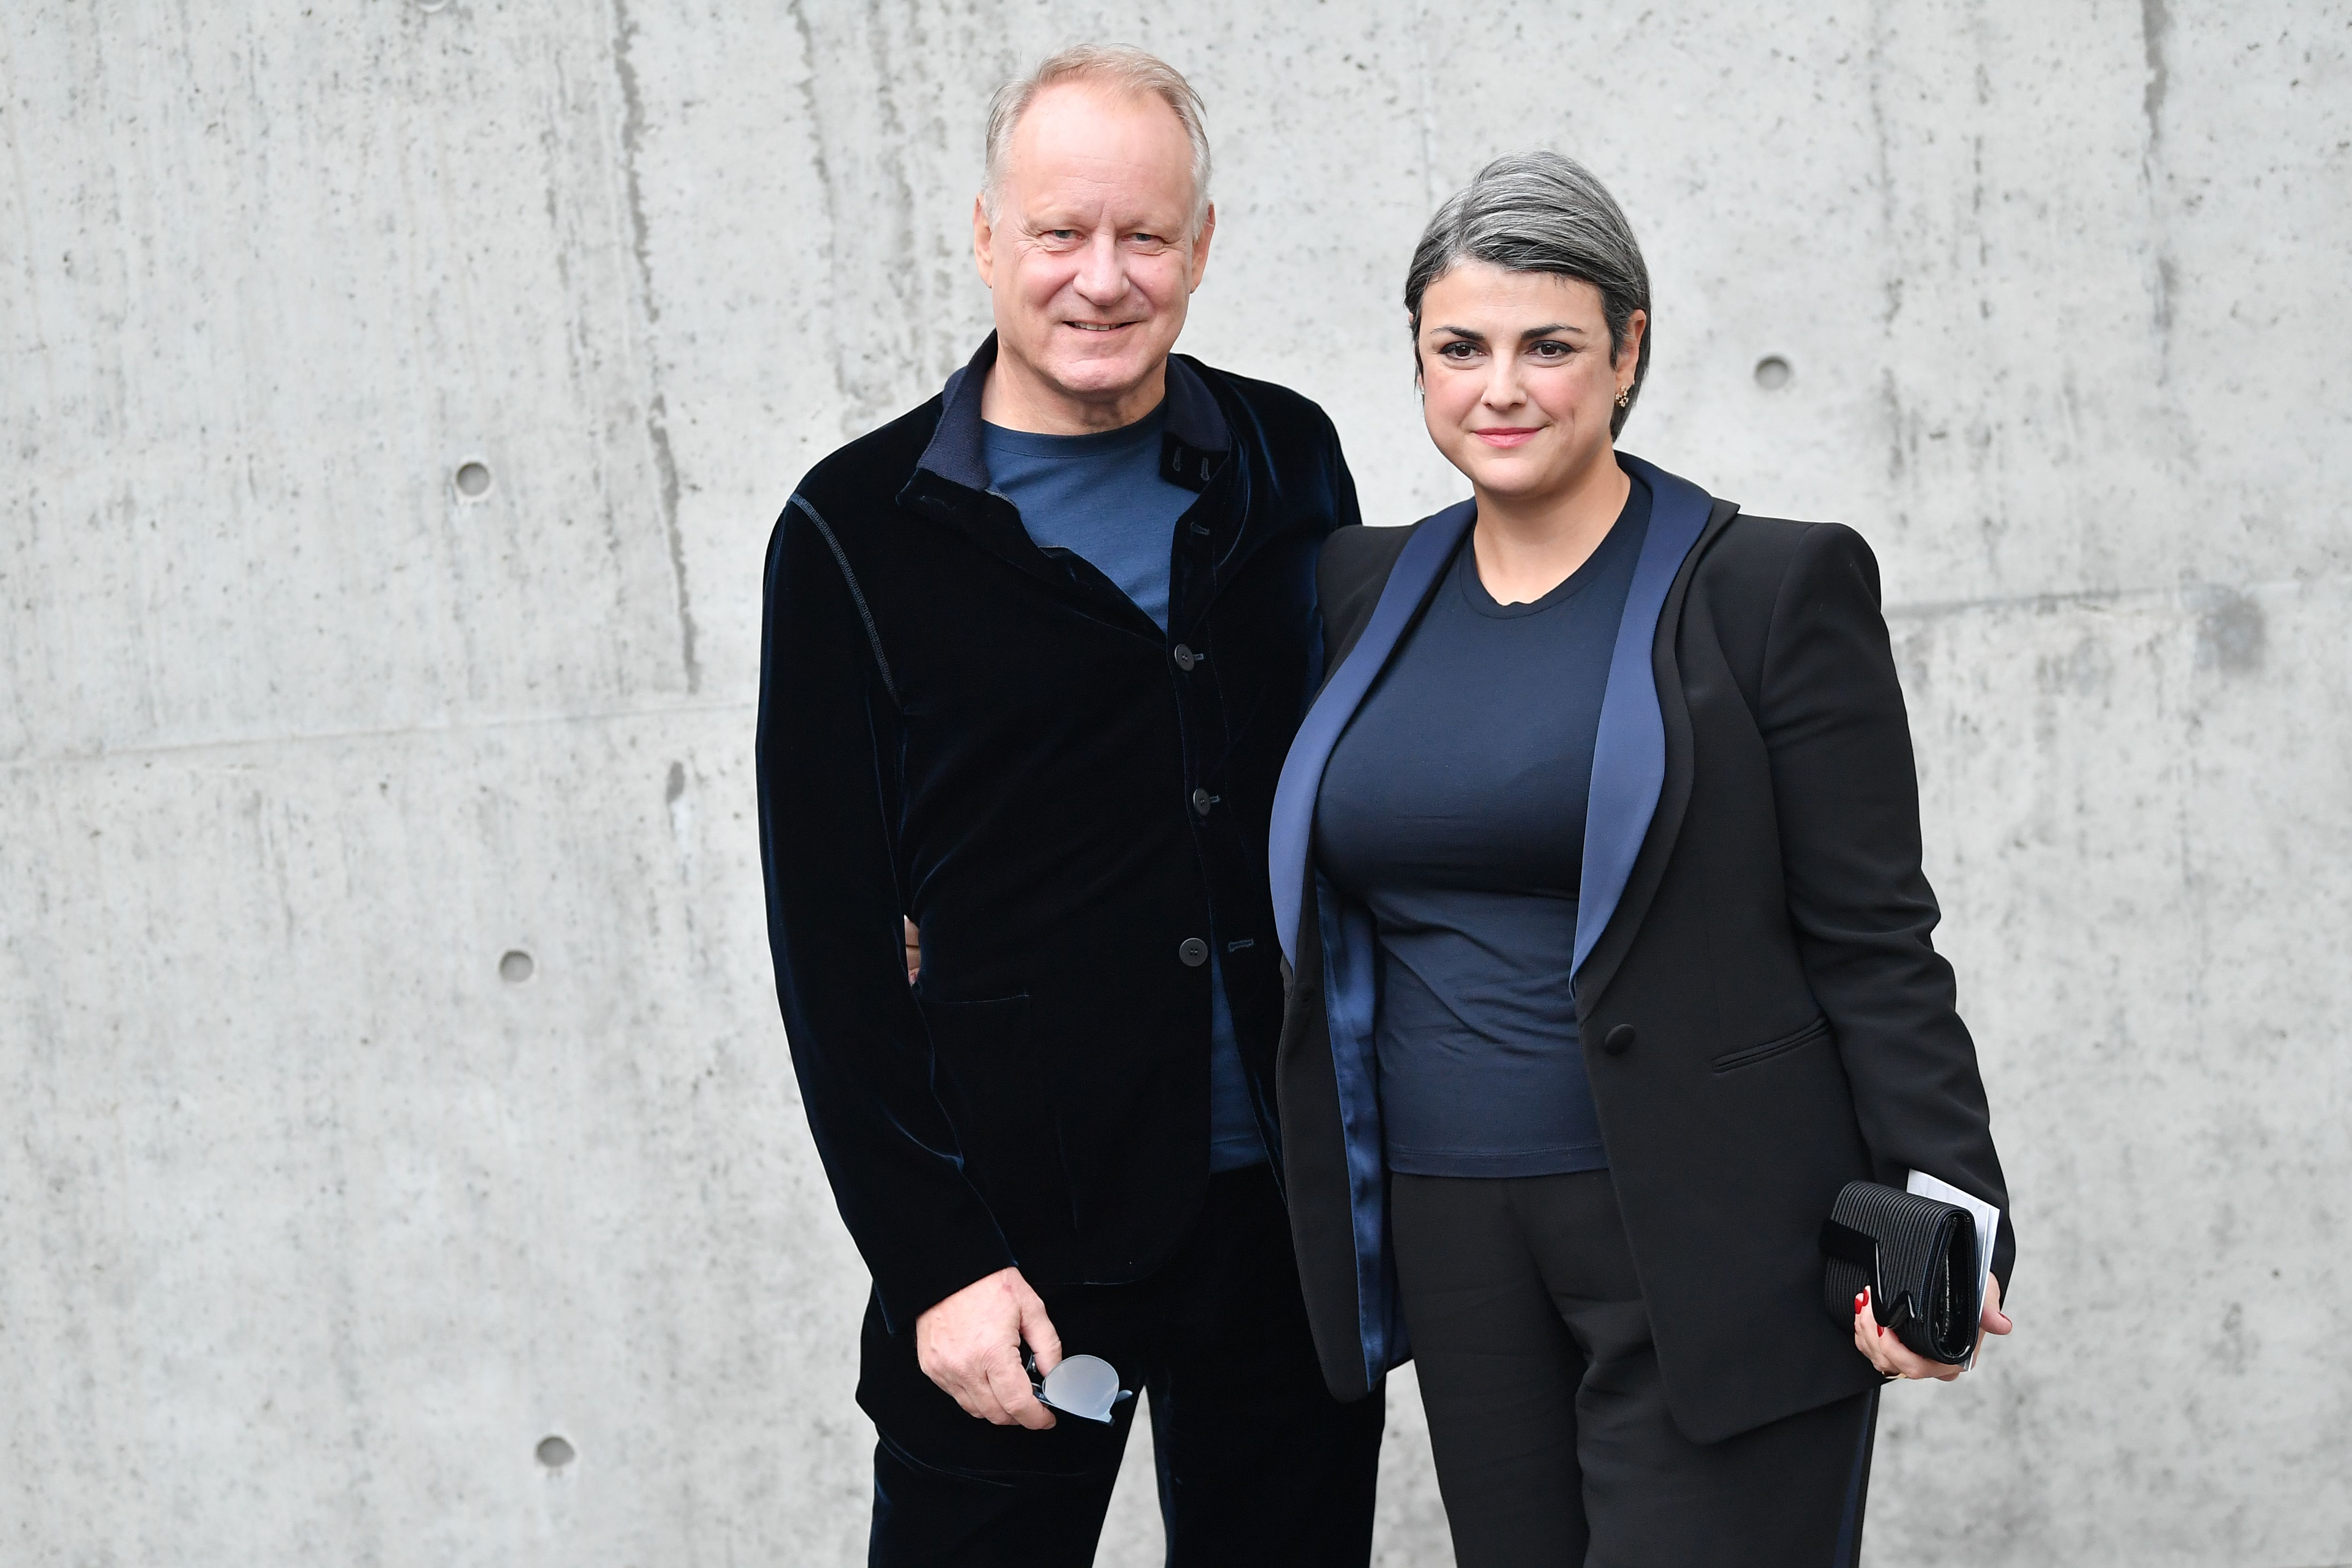 Stellan Skarsgard and Megan Everett at the Giorgio Armani fashion show on January 13, 2020 in Milan, Italy.  |  Source: Getty Images